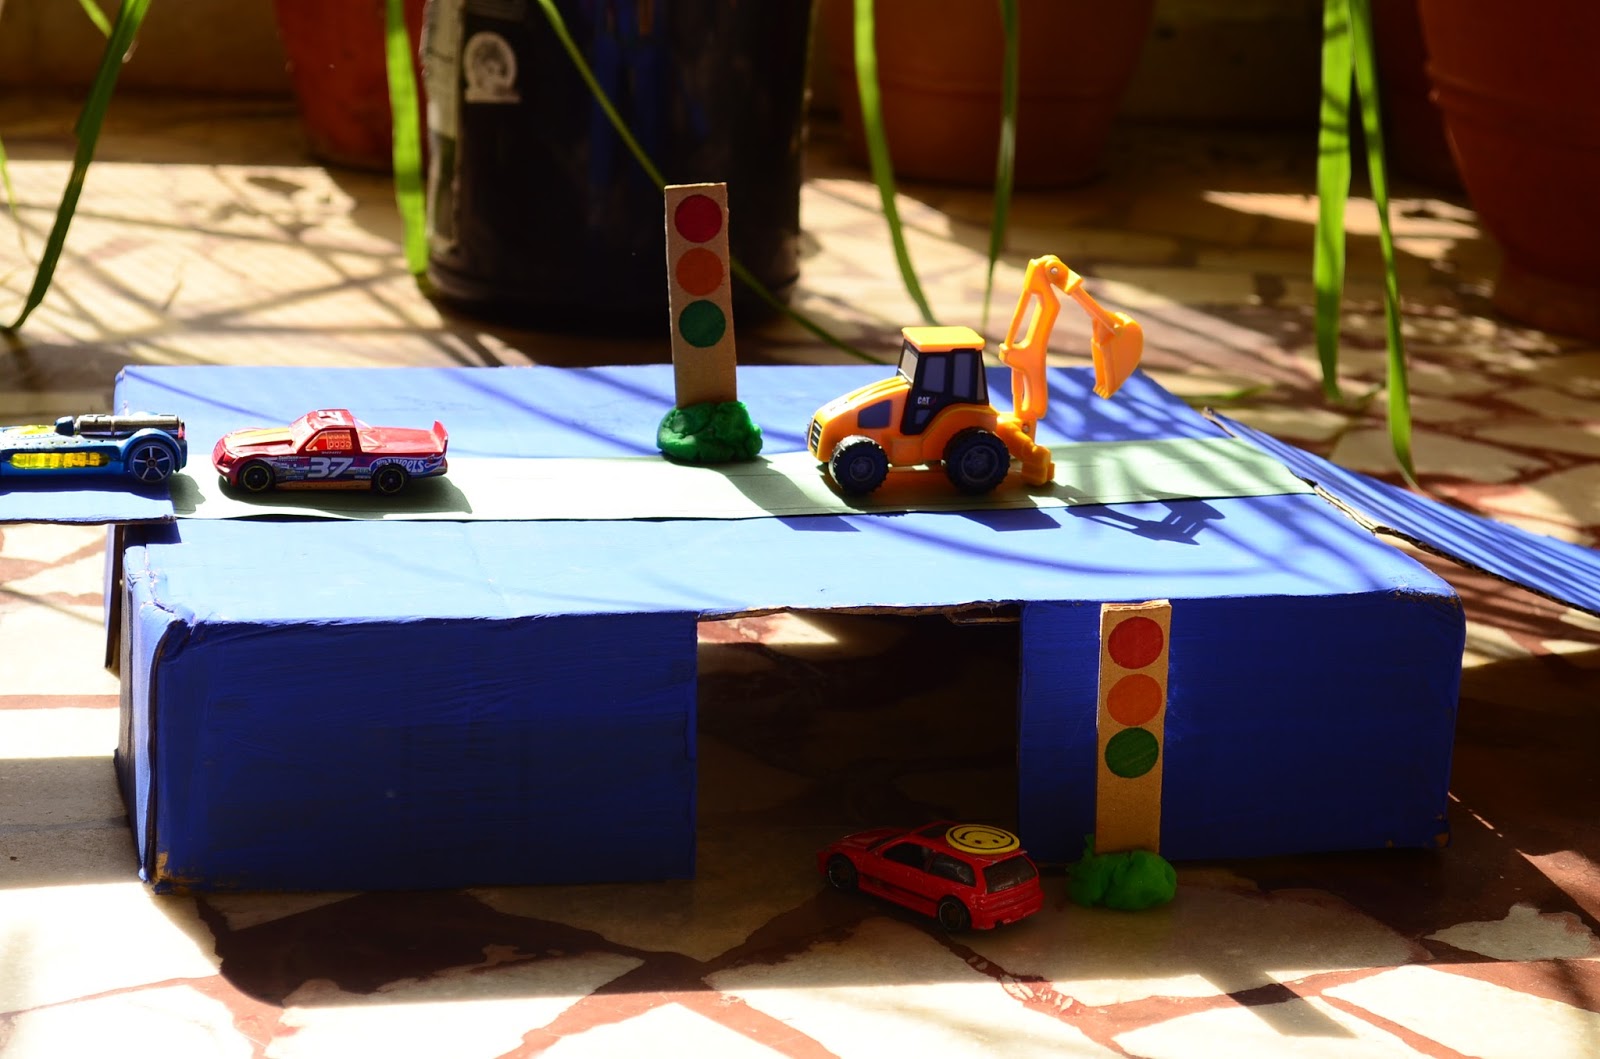 The Practical Mom: DIY Tunnel & Ramps for Toy Cars